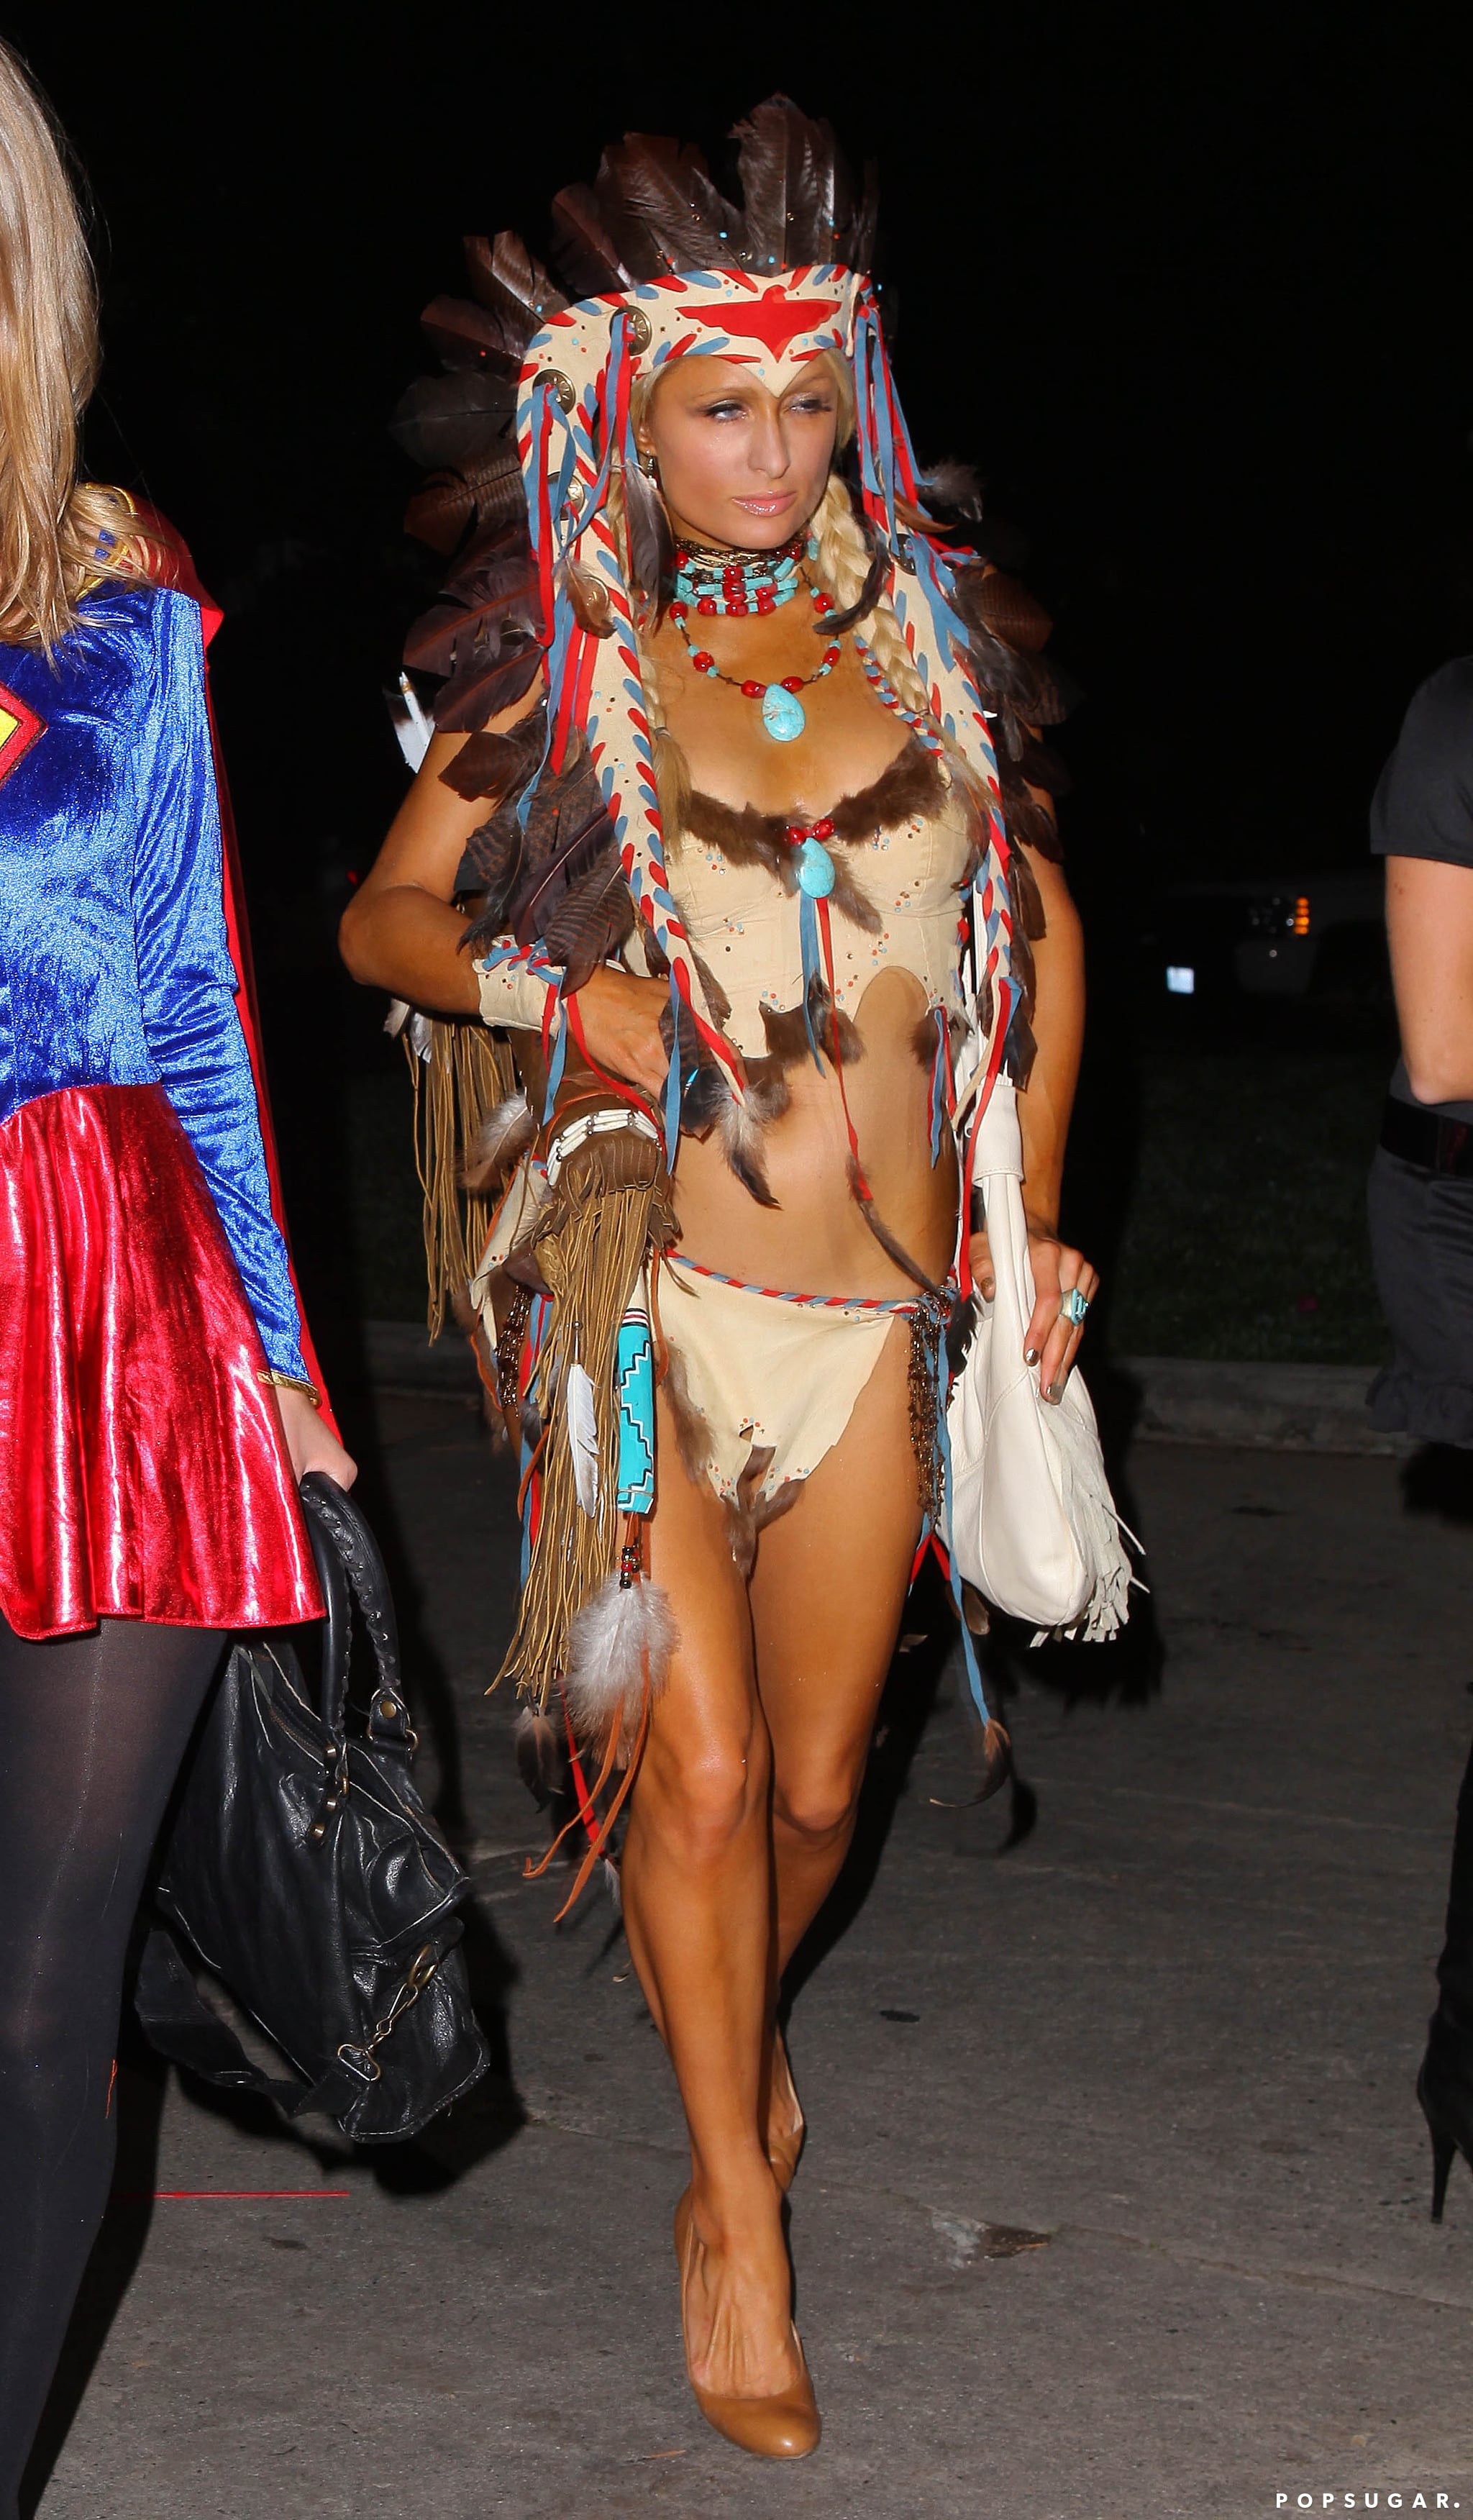 Sexy Native American 2010 When It Comes To Halloween Costumes Paris Hilton Has A Sexy